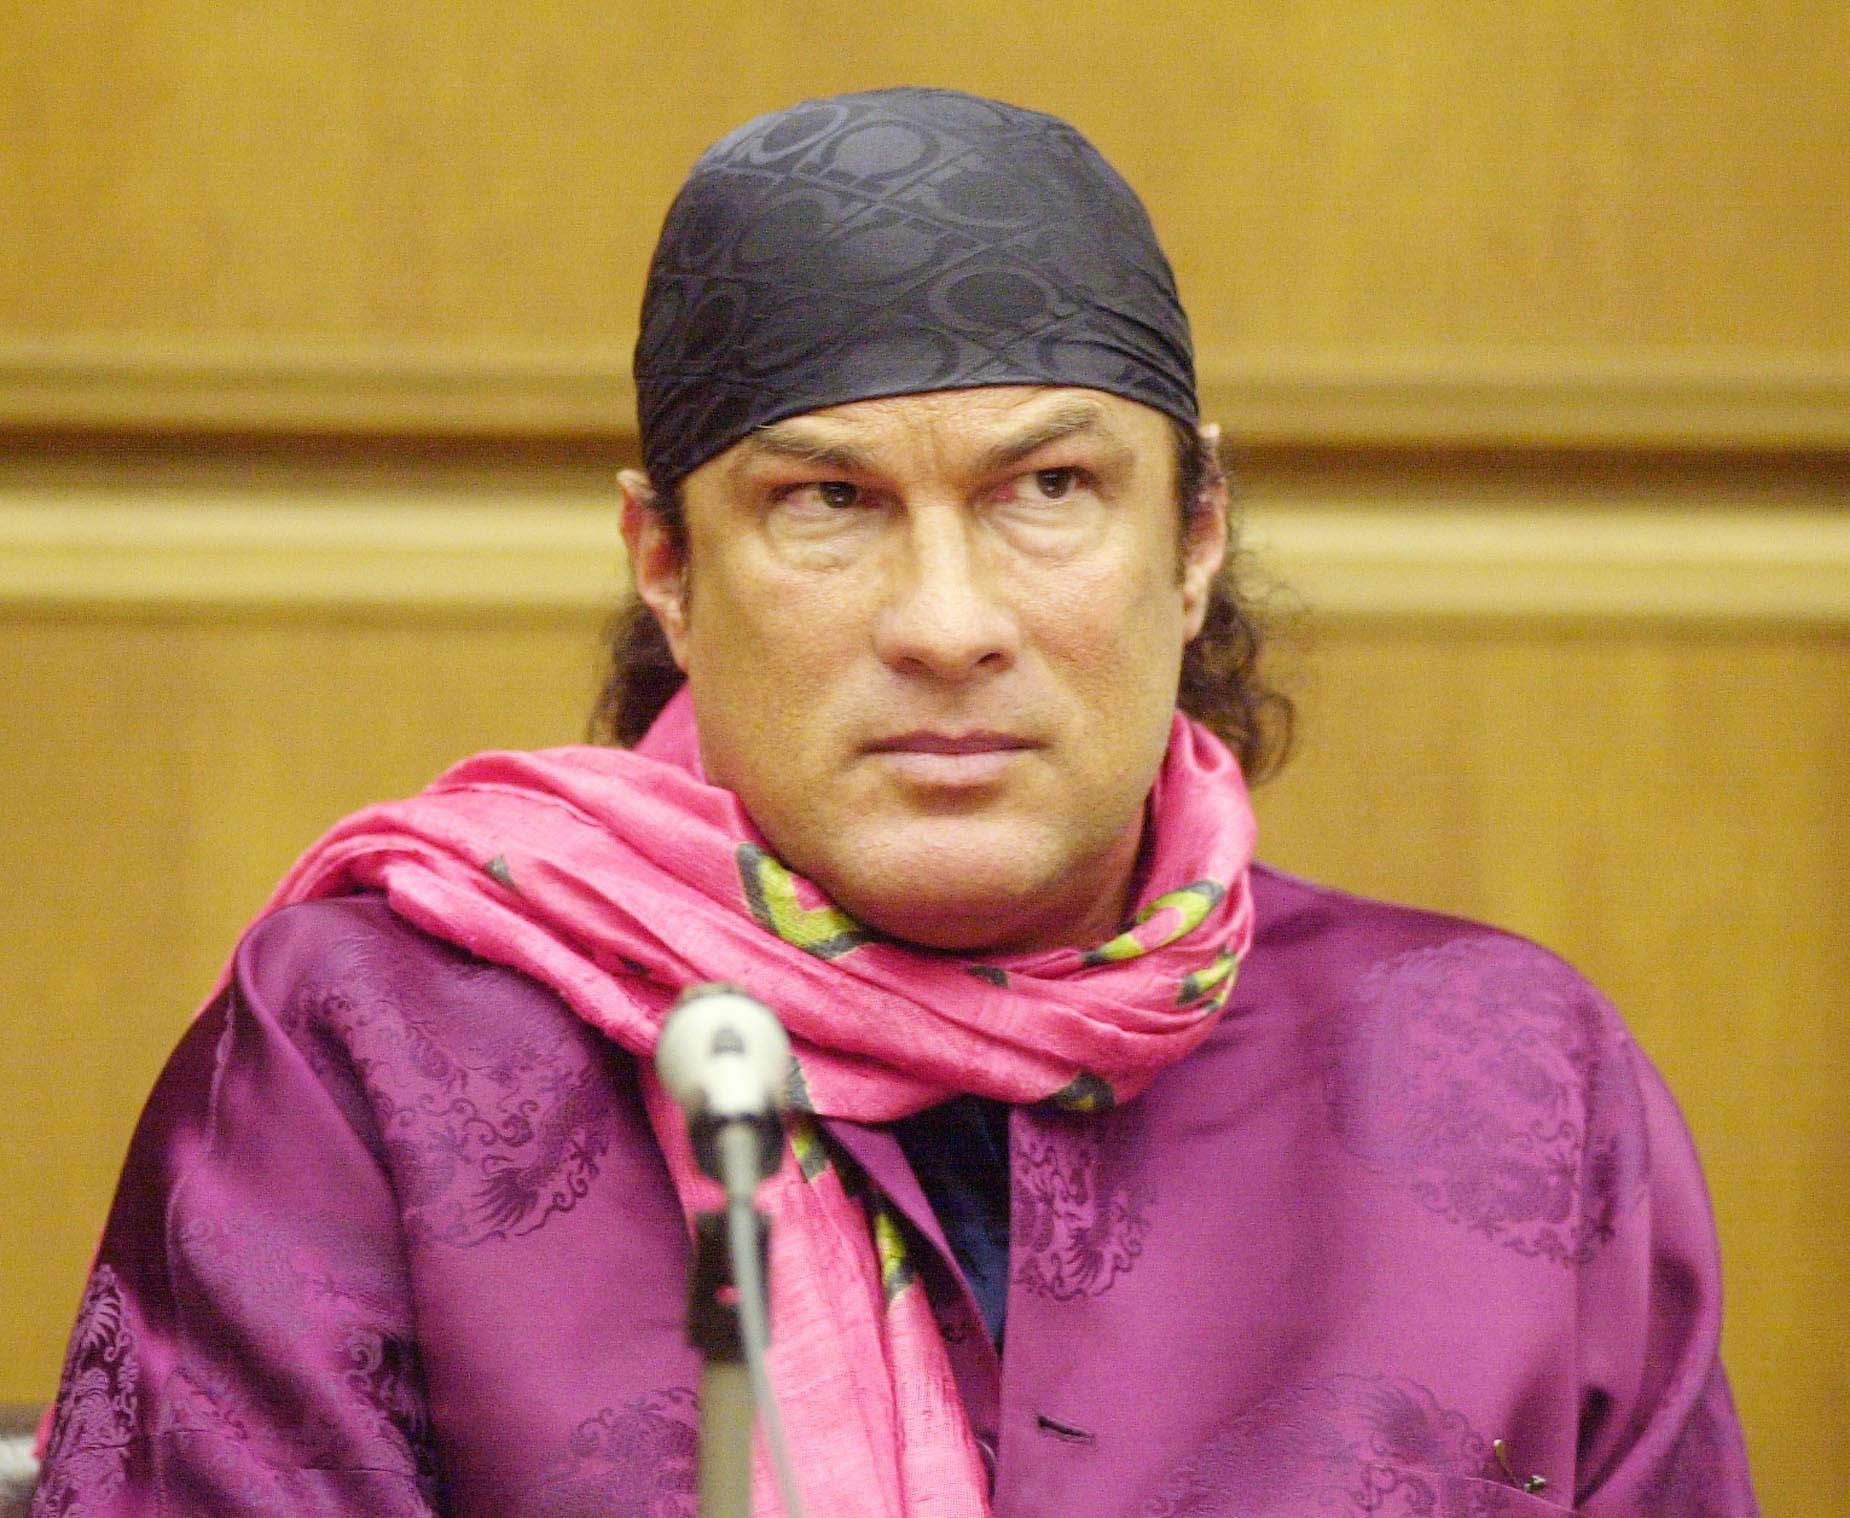 ©2001 RAMEY PHOTO 310-828-3445Actor STEVEN SEAGAL listens to a question as he testifies in a downtown Los Angeles courtroom 12/19/01 in a sexual harassment civil trial brought by a former co-worker against him.